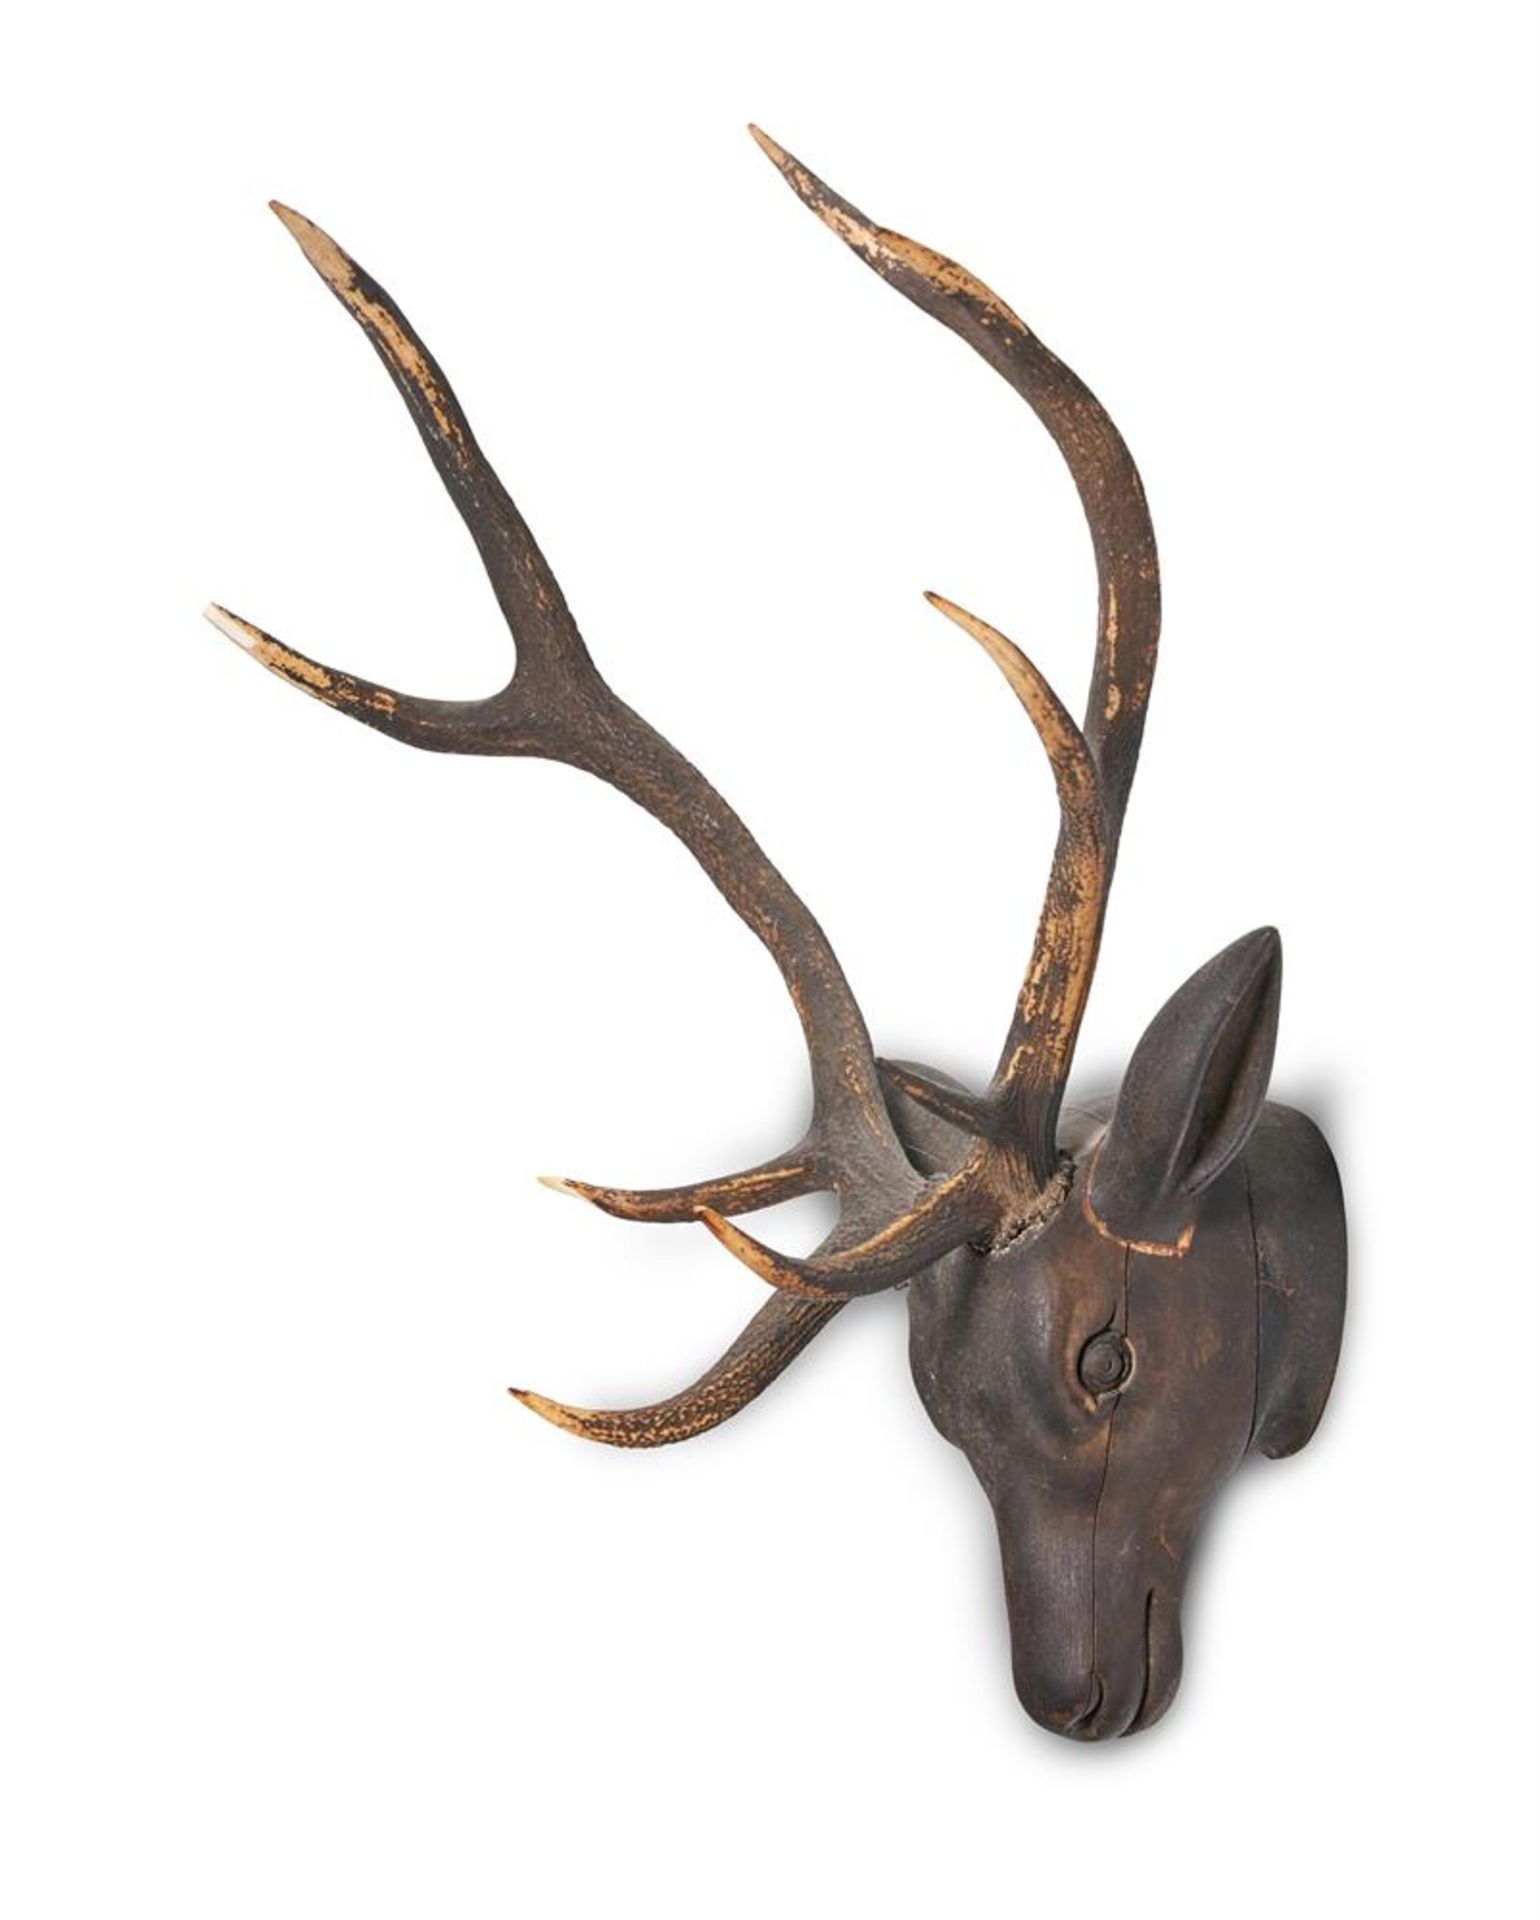 A CARVED WOOD AND ANTLER MOUNTED HUNTING TROPHY, LATE 19TH CENTURY